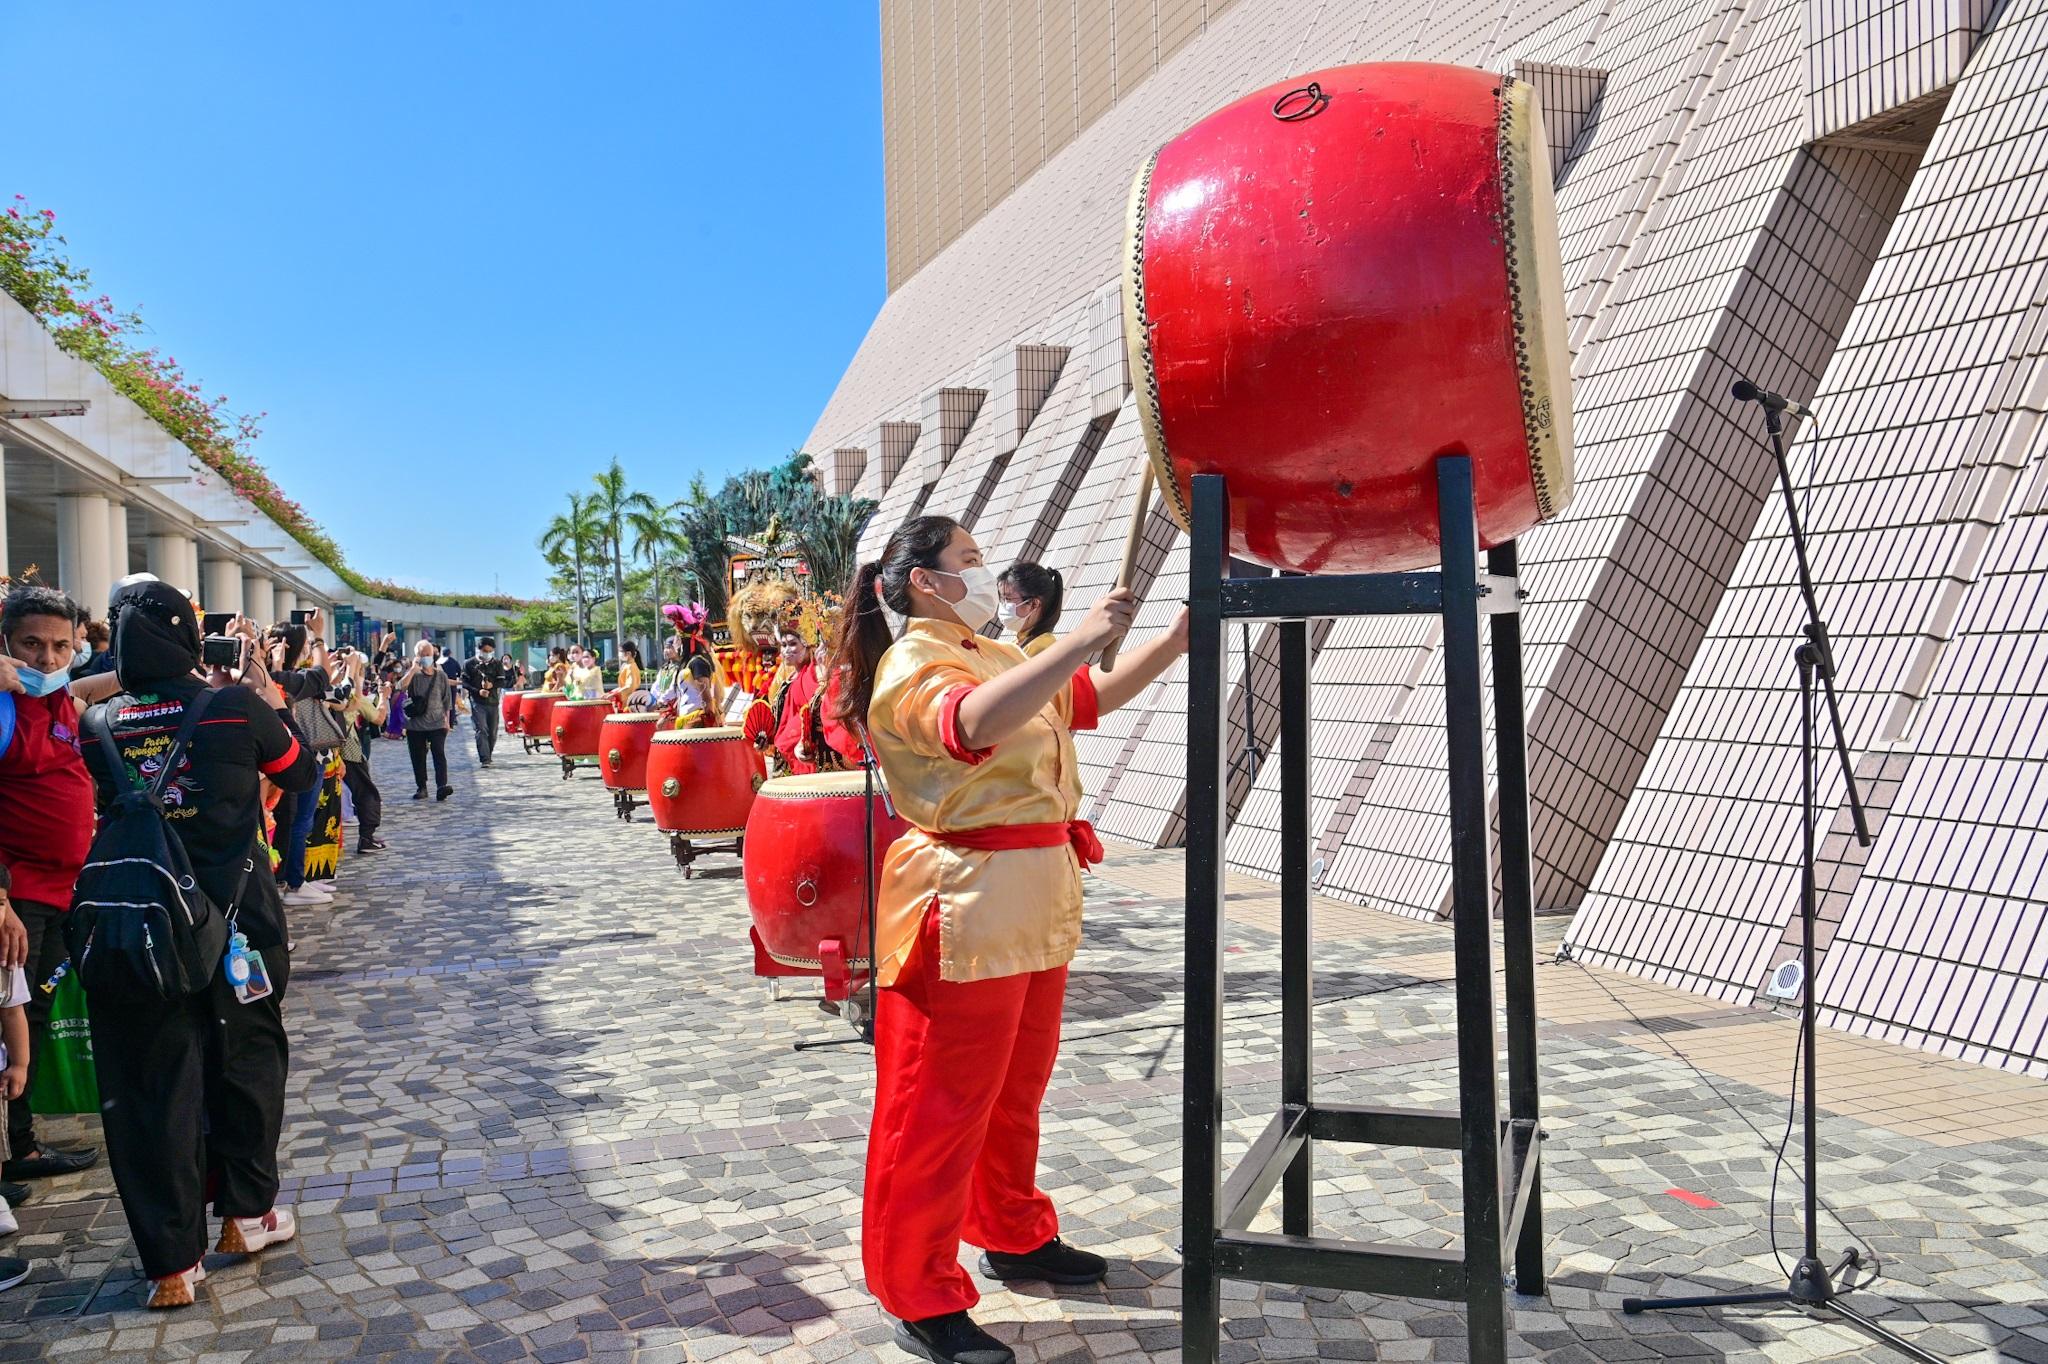 The Leisure and Cultural Services Department held the International Ethnic Cultural Performances at the Hong Kong Cultural Centre Piazza this afternoon (November 13), showcasing the artistry and cultures of different parts of the world through a variety of activities including ethnic stage performances, cultural masks displays and fringe activity booths. Photo shows the drumming performance at the opening ceremony.